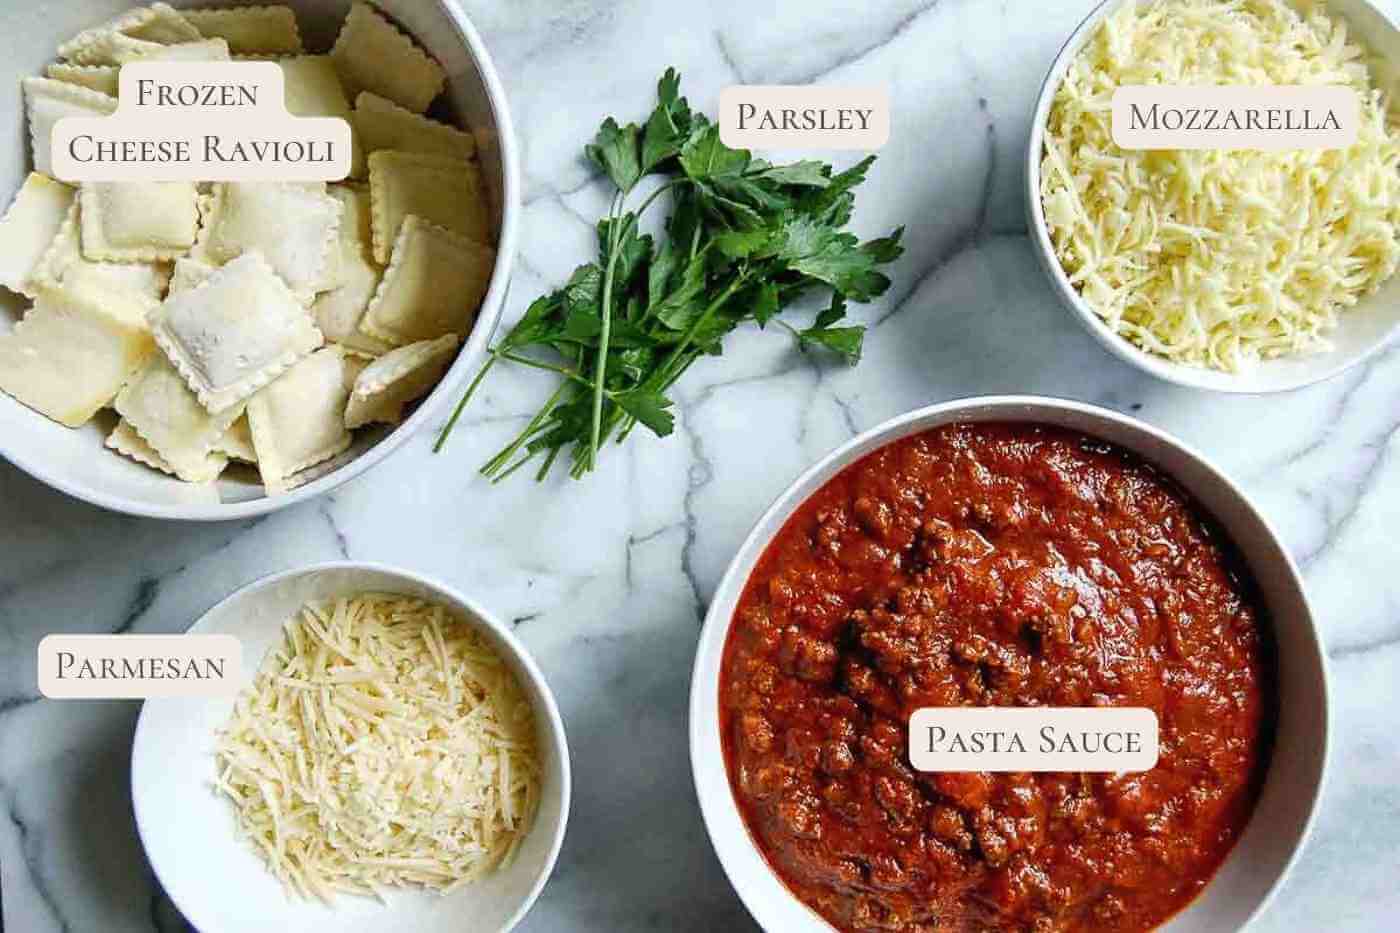 ingredients for lazy lasagna with frozen ravioli